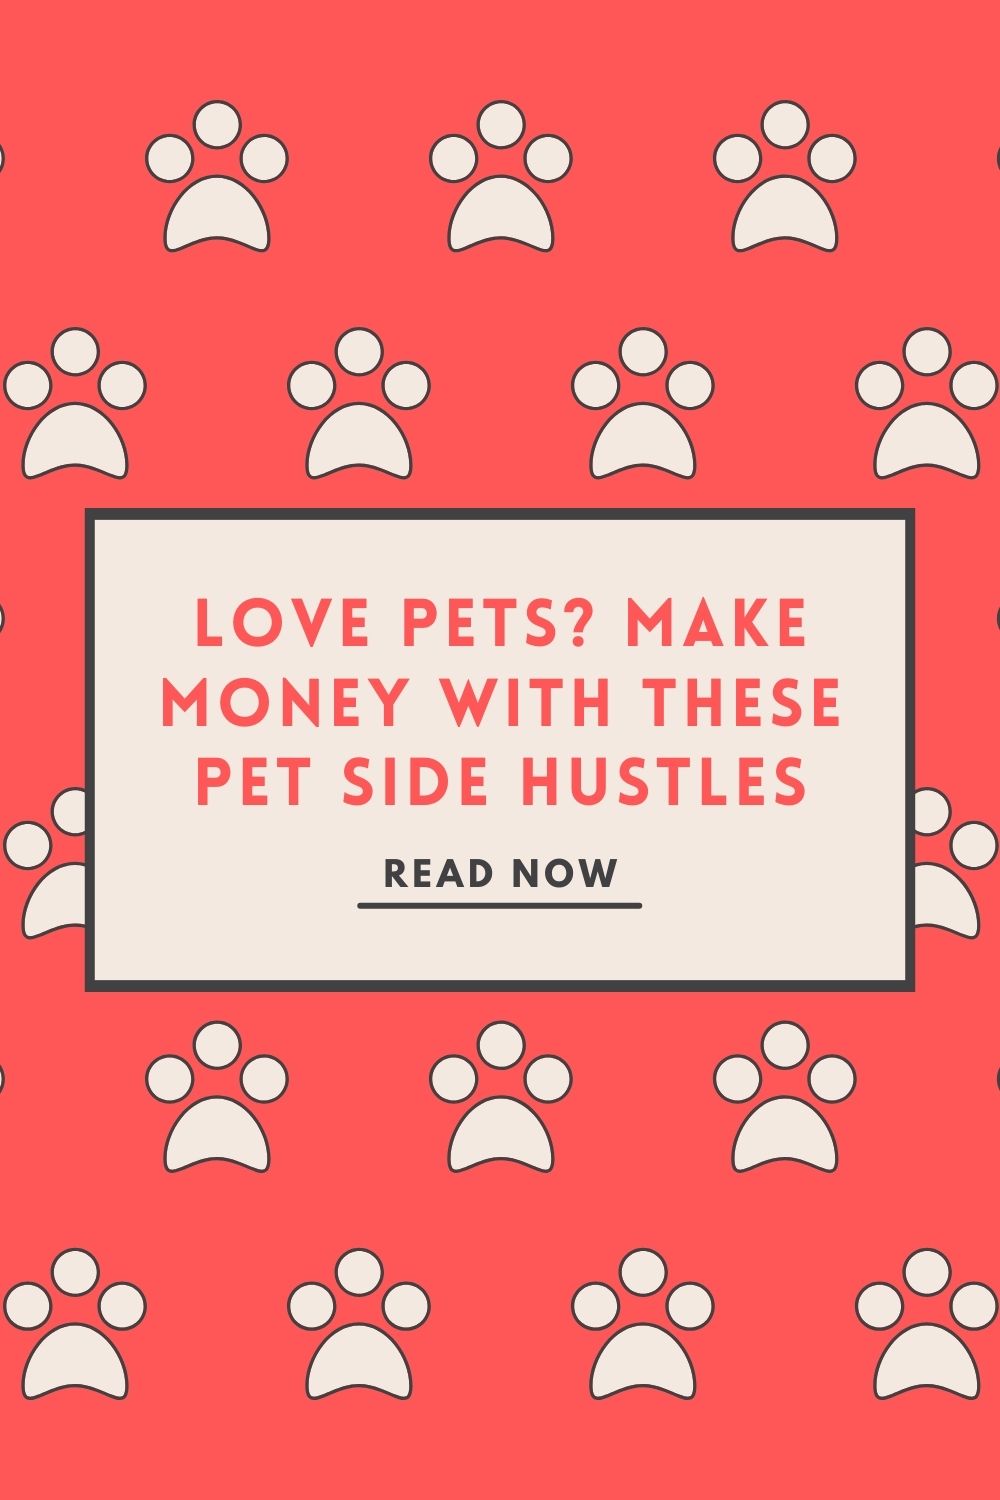 Love Pets? Make Money With These Pet Side Hustles